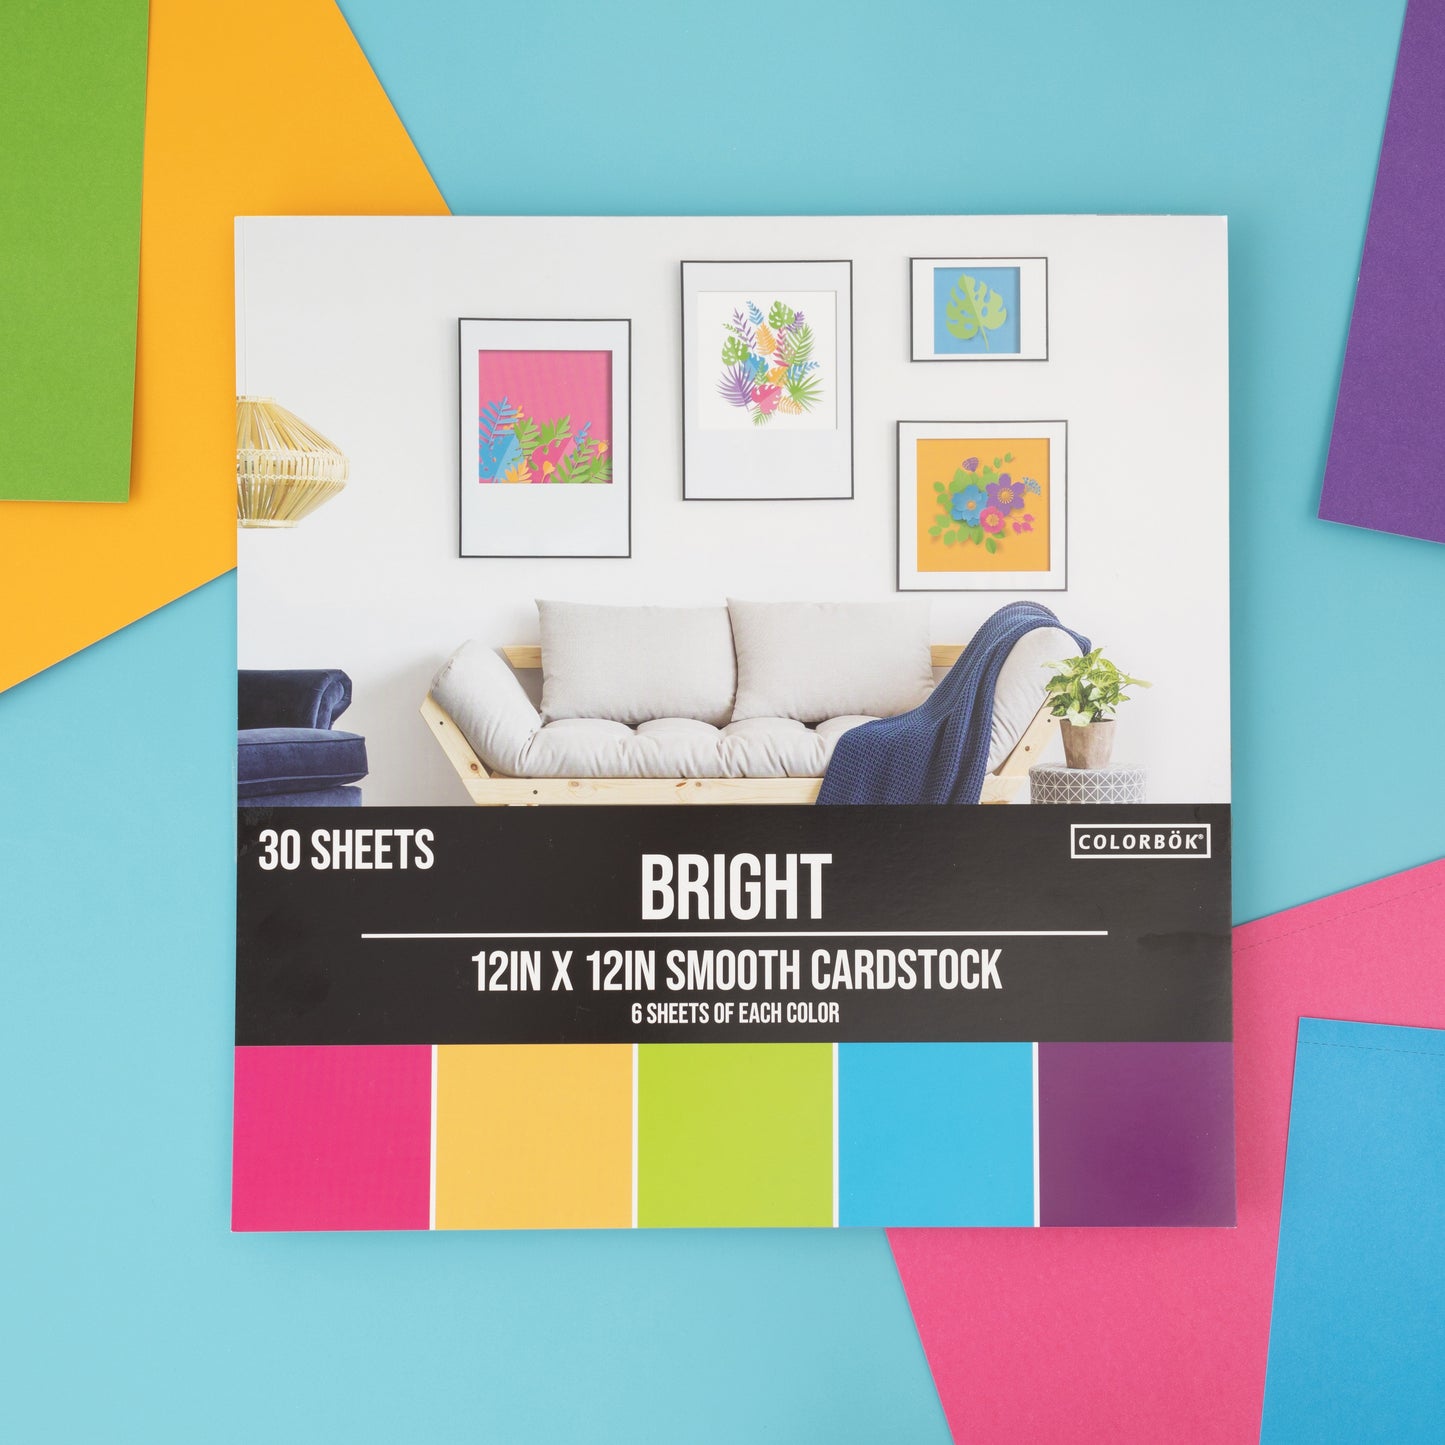 Colorbok 78lb Smooth Cardstock 12"X12" 30/Pkg-Bright, 5 Colors/6 Each